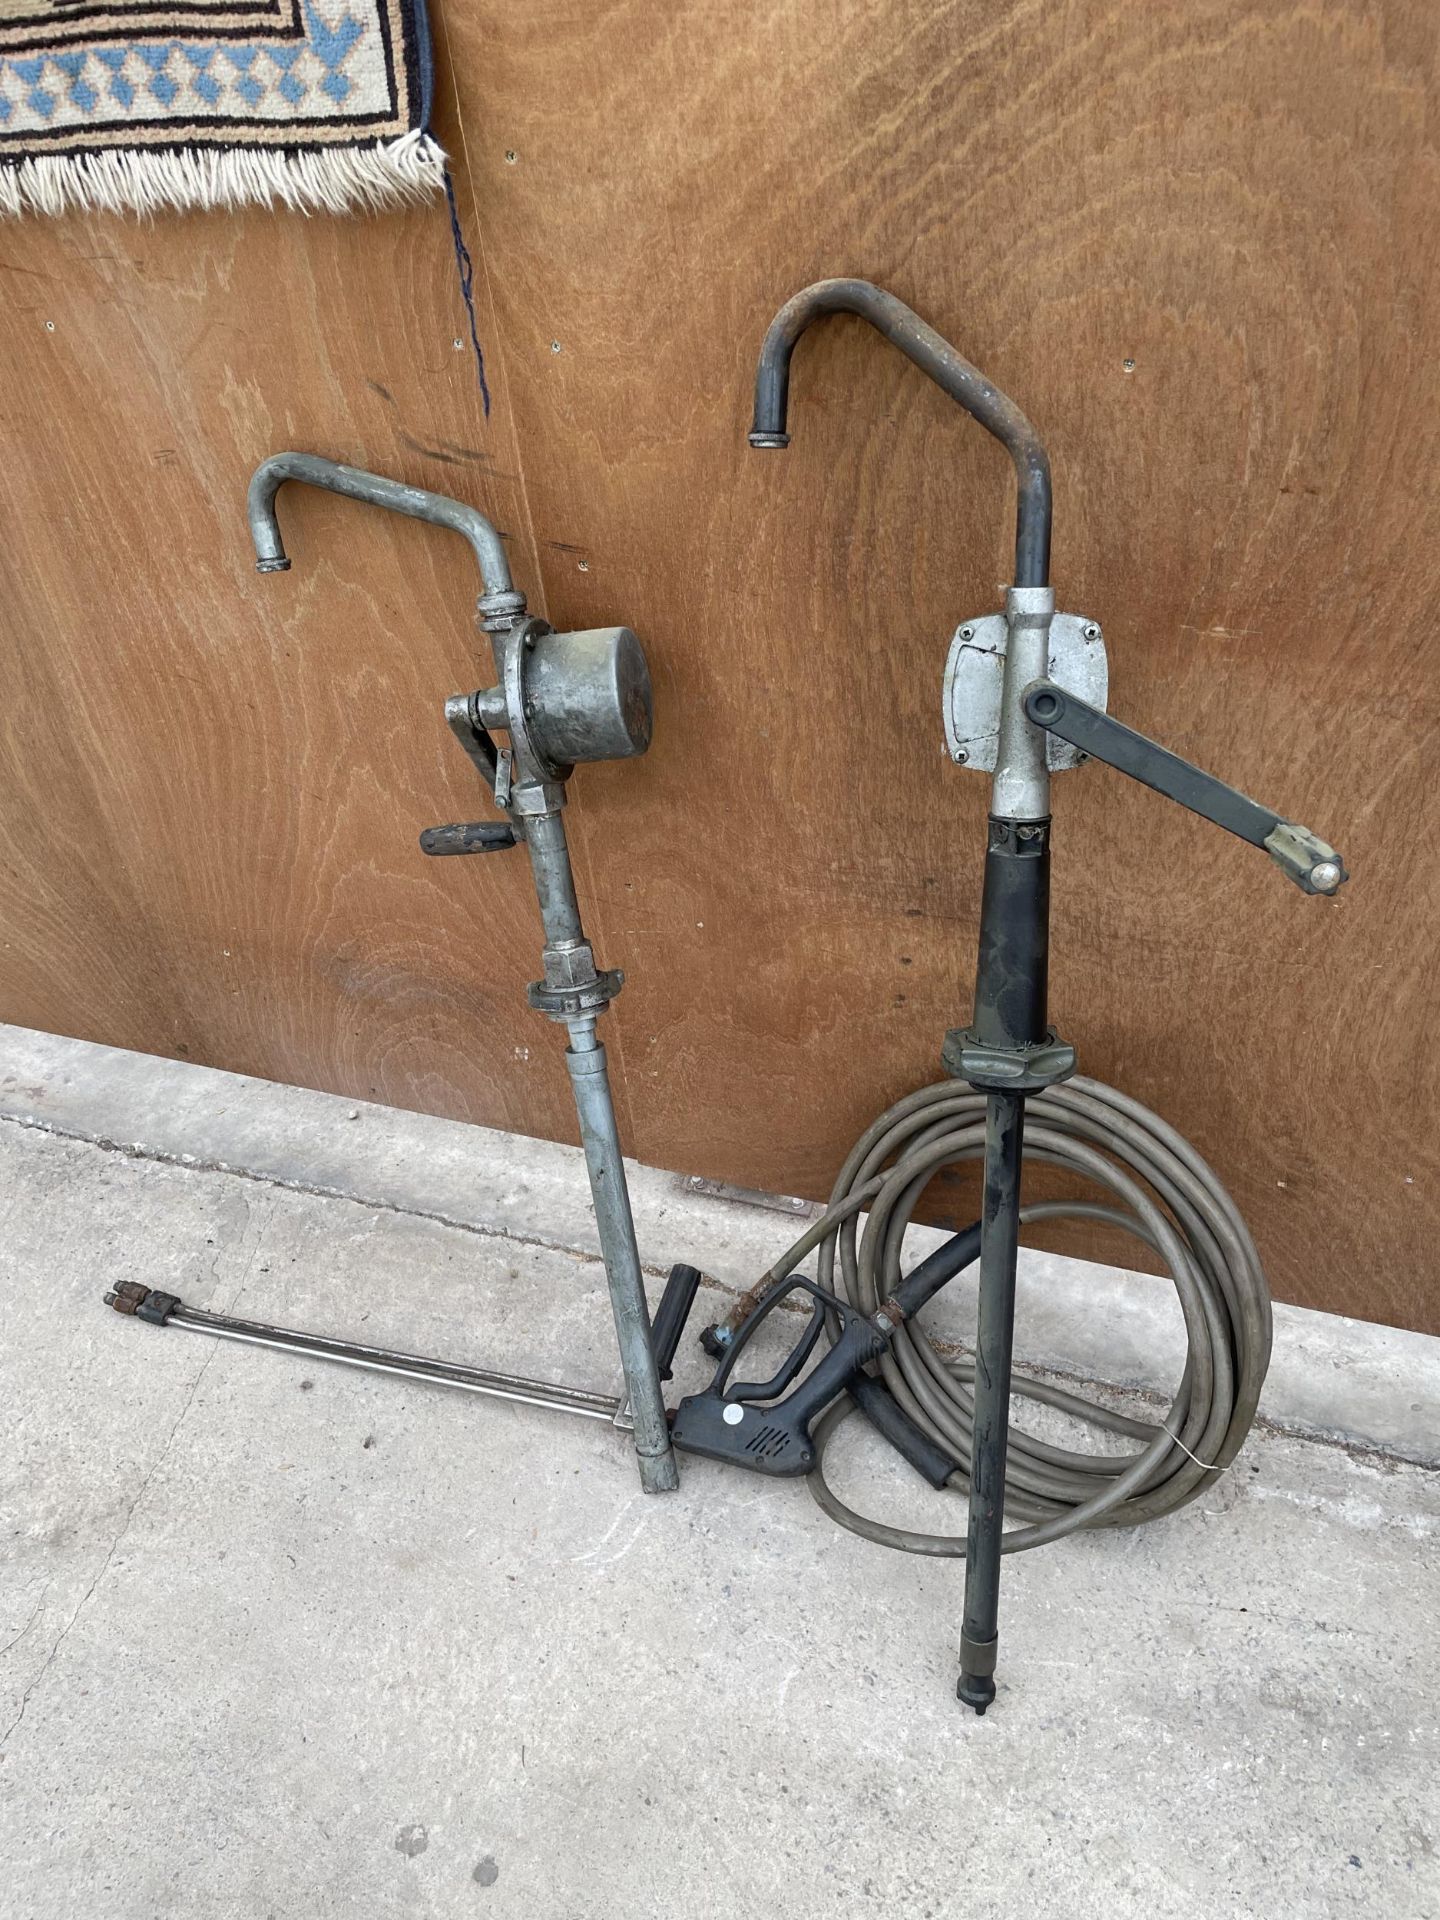 TWO BARREL PUMPS AND A PRESSURE WASHER HOSE AND LANCE